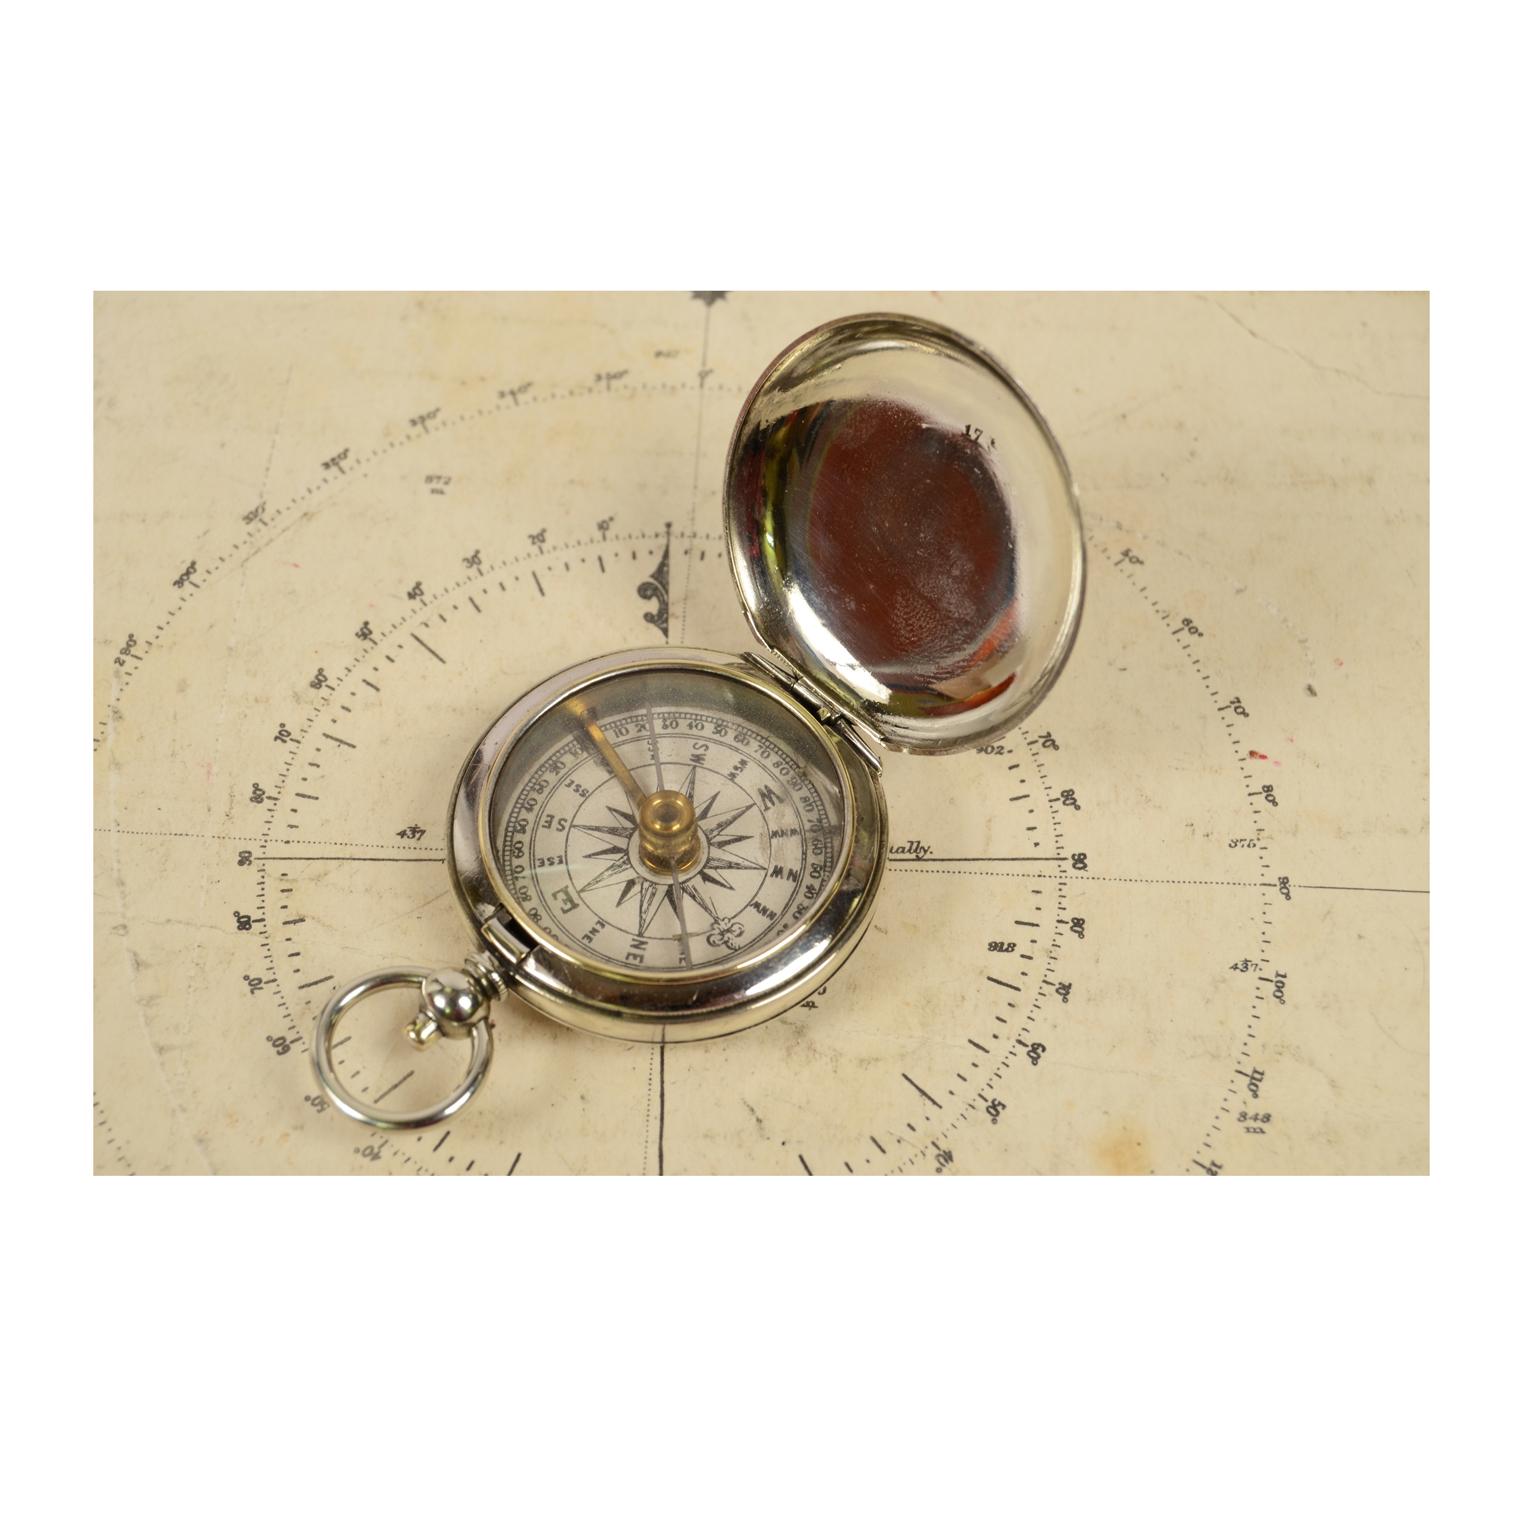 Officer pocket compass of chromed brass shaped like a pocket watch. Made in England in the early 1900s. The compass is equipped with a lid with snap closure with release button inside the ring. Compass card with sixteen winds complete with